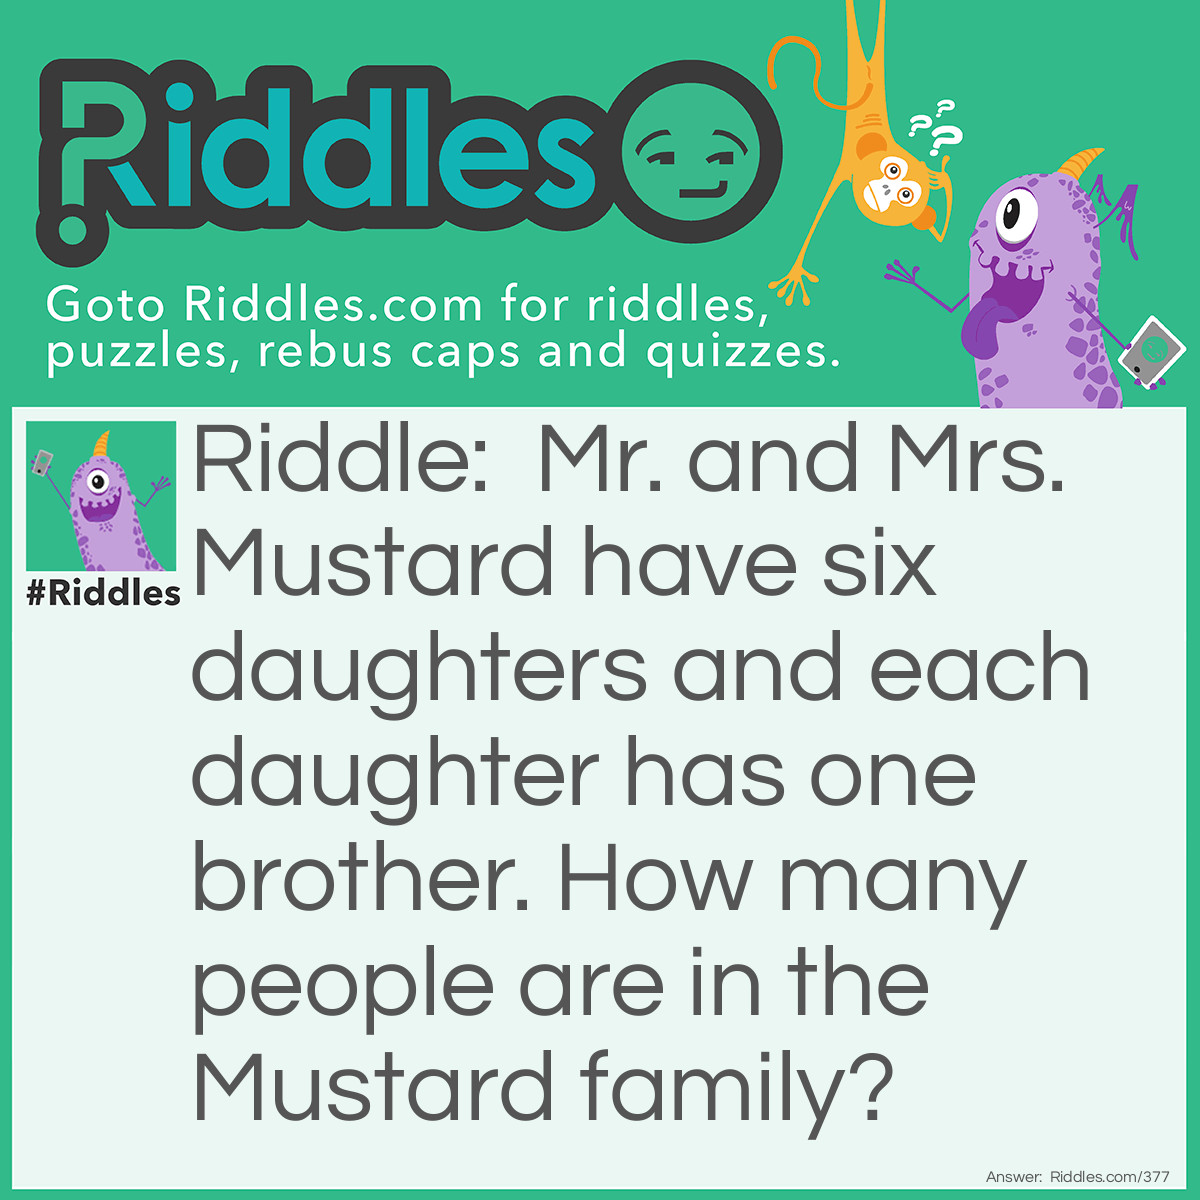 Riddle: Mr. and Mrs. Mustard have six daughters and each daughter has one brother. How many people are in the Mustard family? Answer: There are nine Mustards in the family. Since each daughter shares the same brother, there are six girls, one boy and Mr. and Mrs. Mustard.